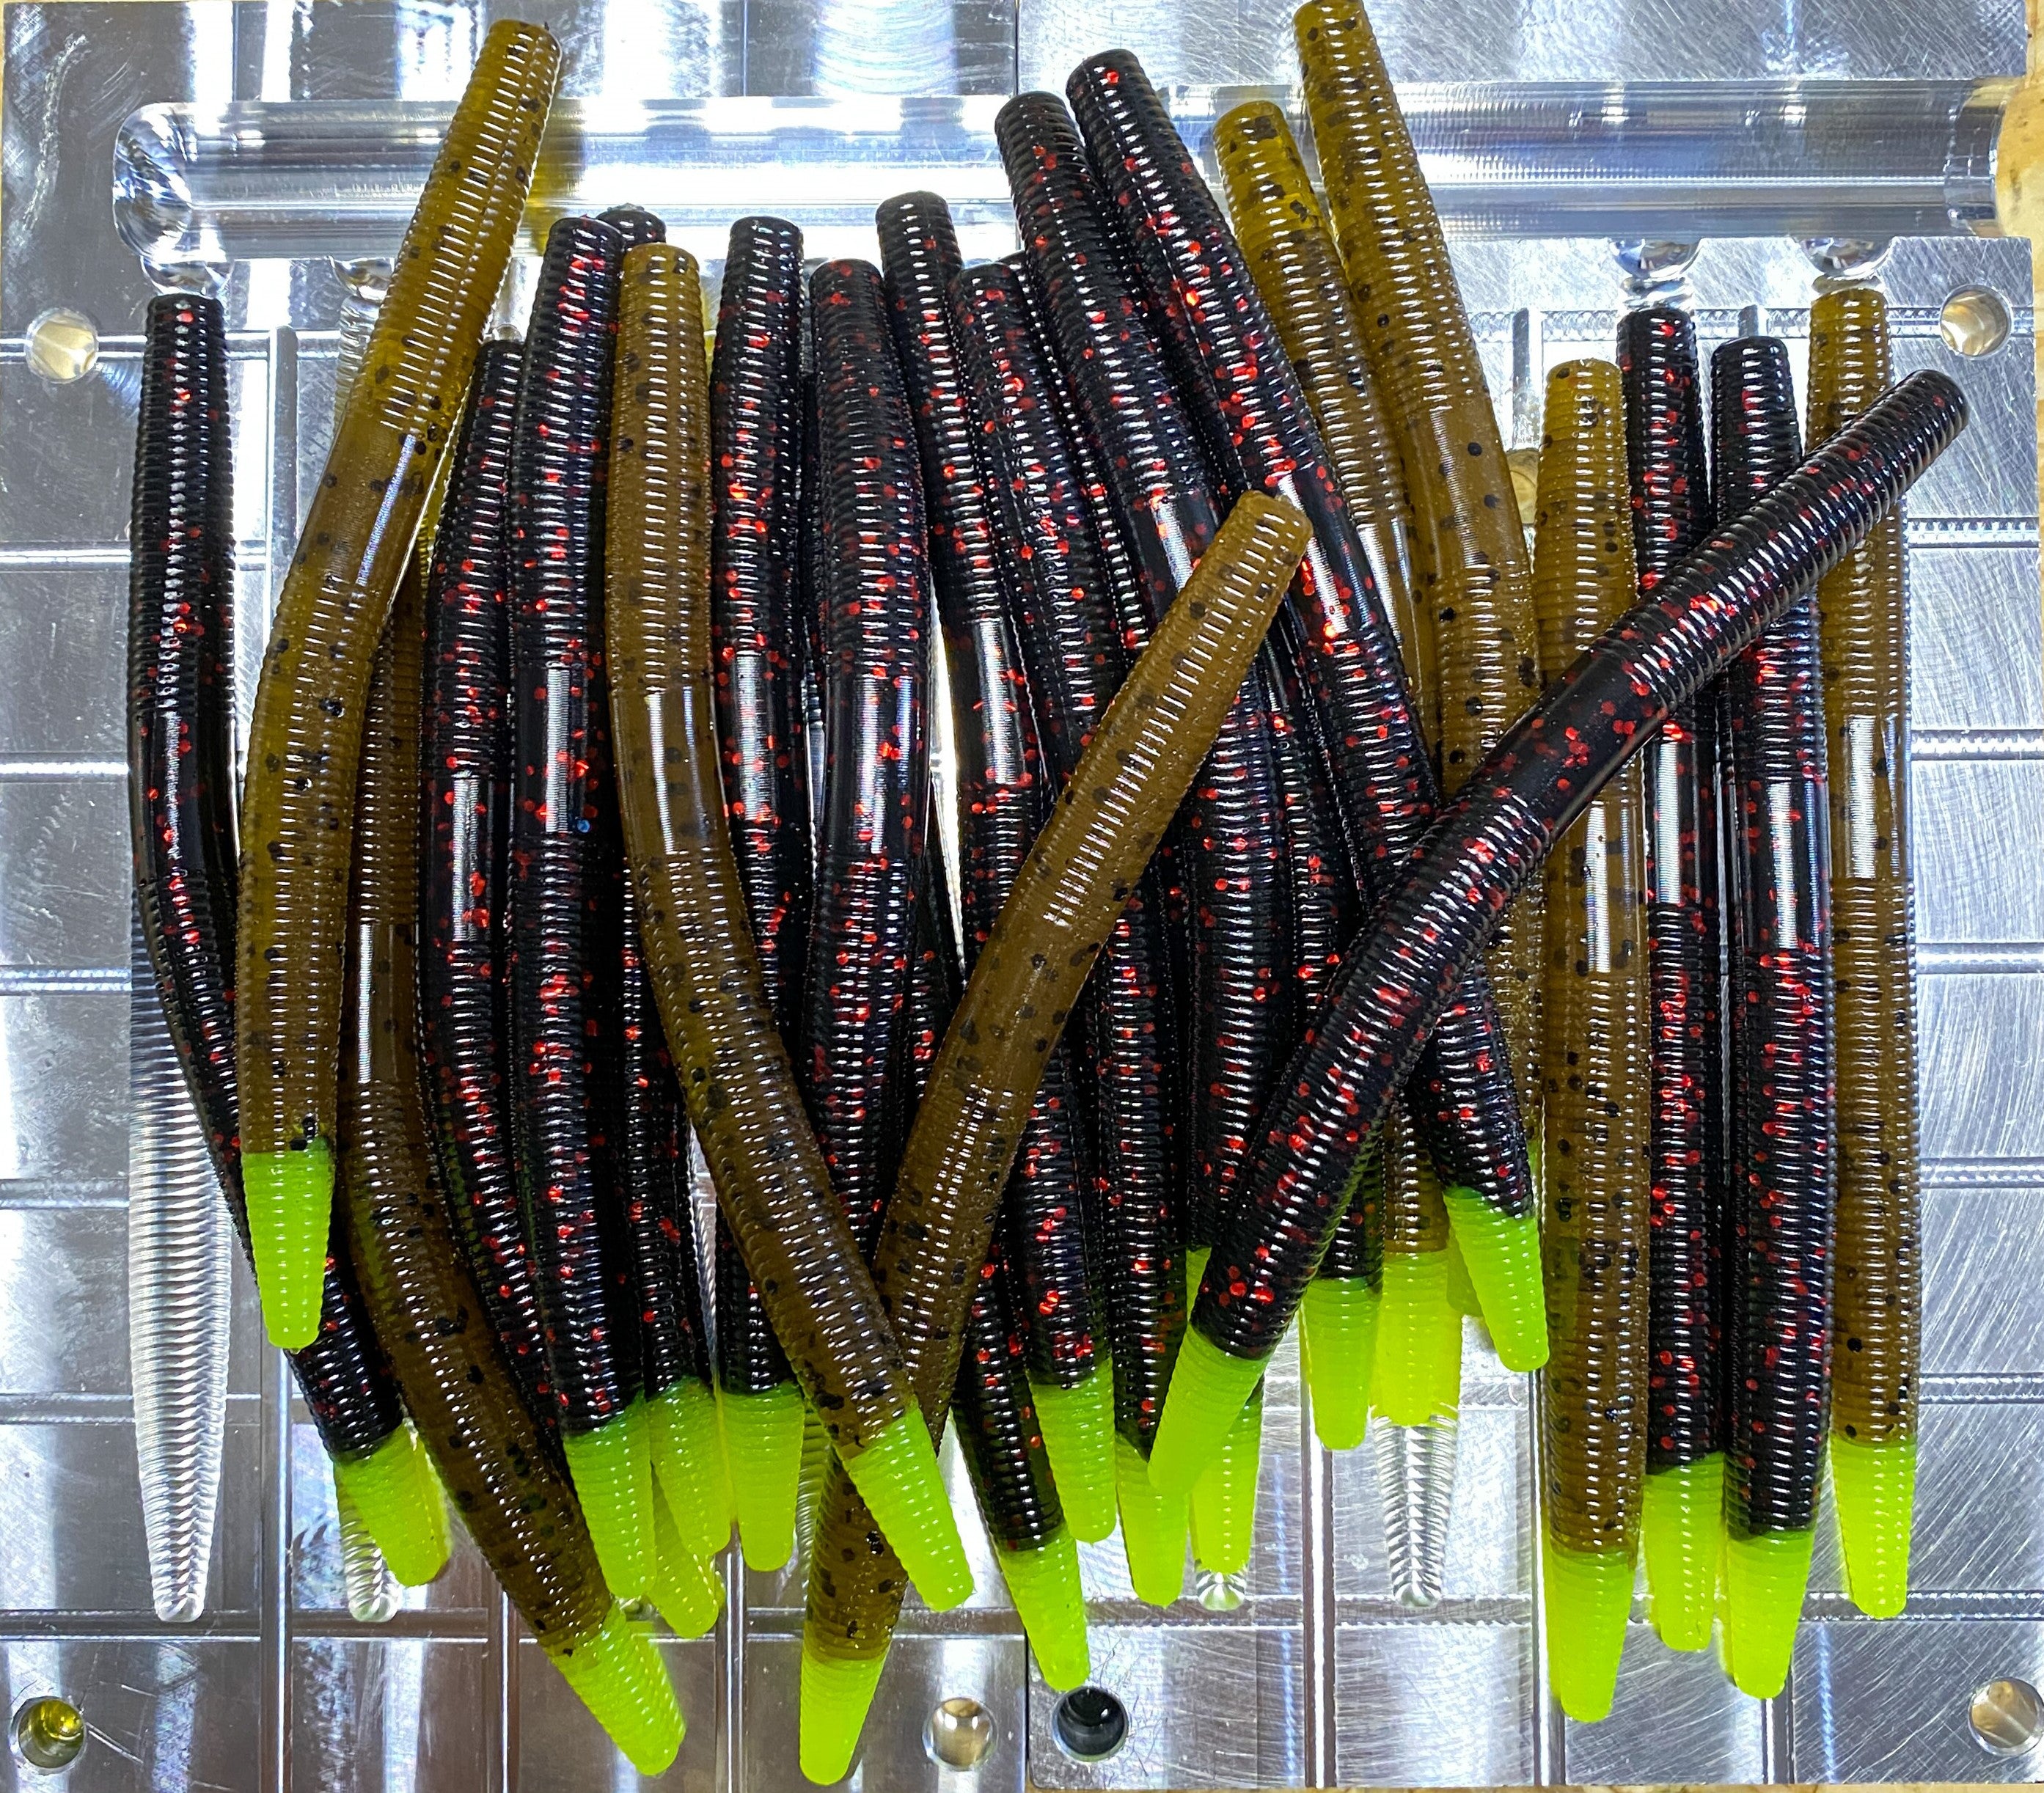 chartreuse tipped obee 5-inch stick worms